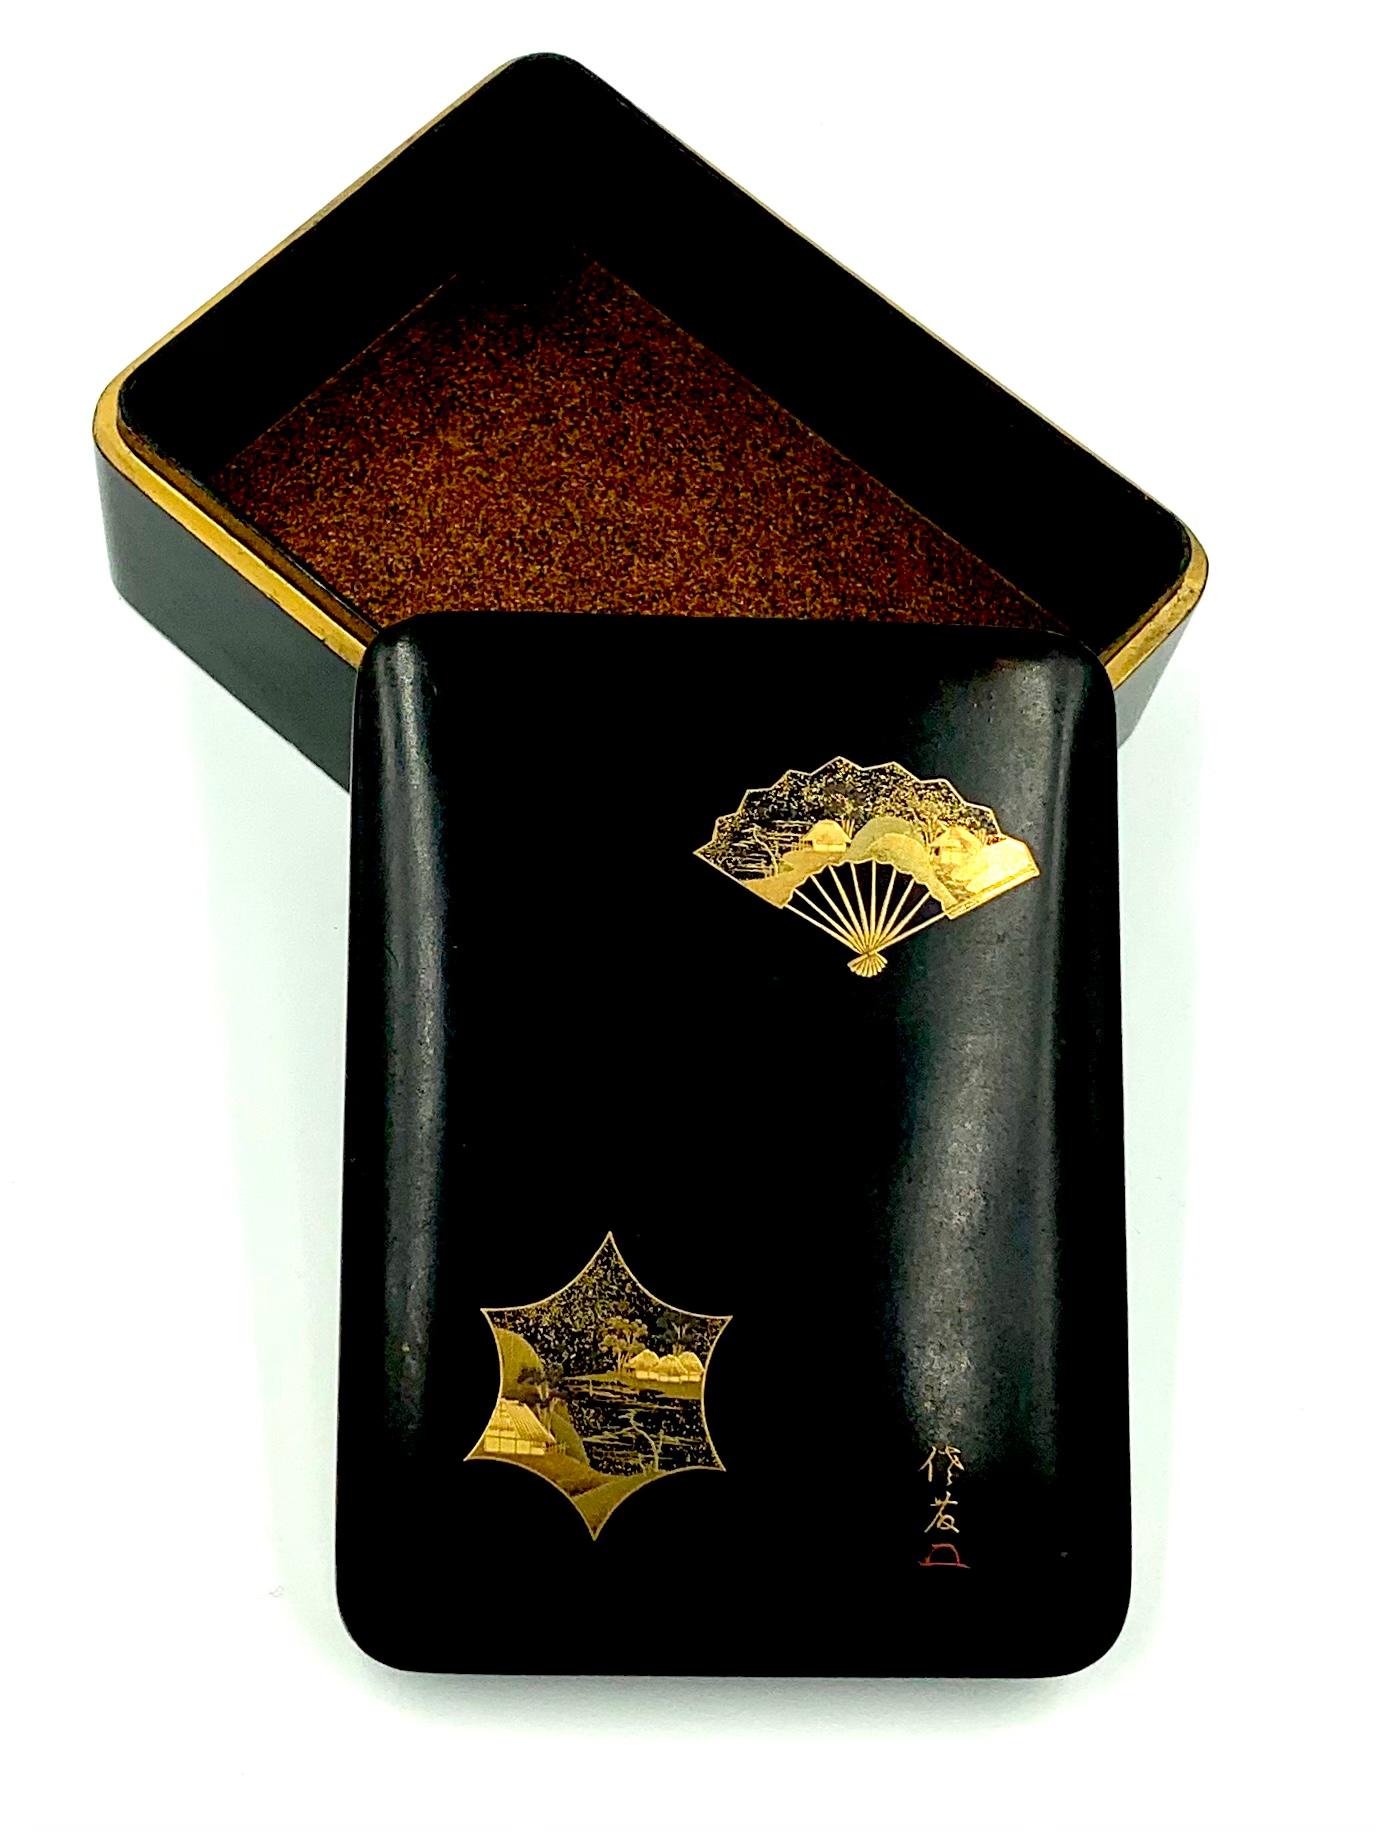 A fine antique Japanese Meji Period lacquer box decorated with a fan and a stylized star shaped window in the maki-e technique. The fan at the top right corner, fully opened depicting an idyllic traditional Japanese landscape with two charming